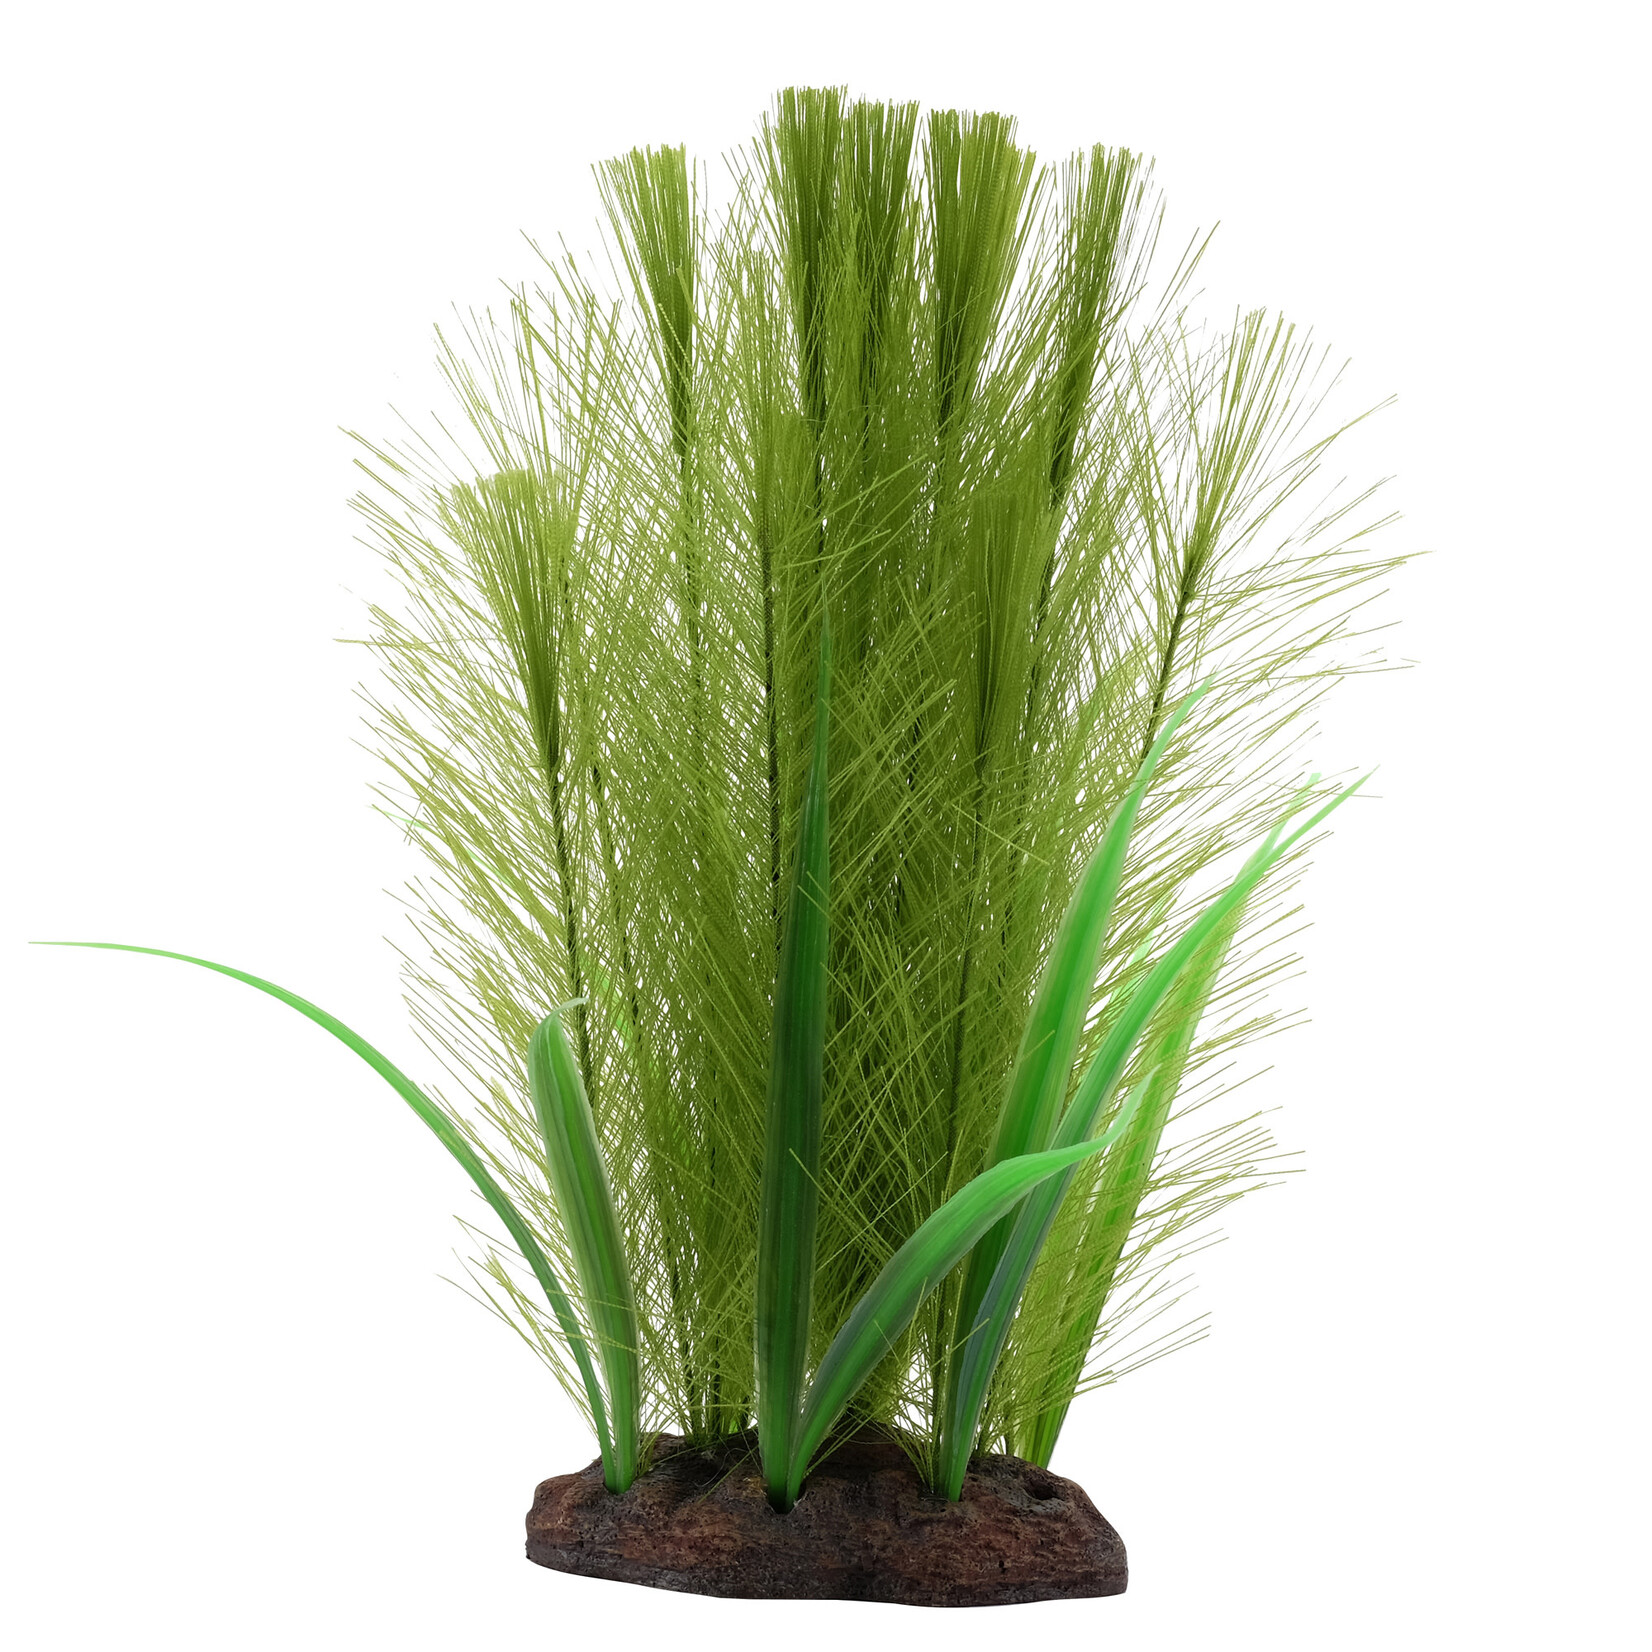 Fluval Sea Fluval Aqualife Plant Scapes Green Parrot's Feather/Valisneria Plant Mix - 20 cm (8 in)